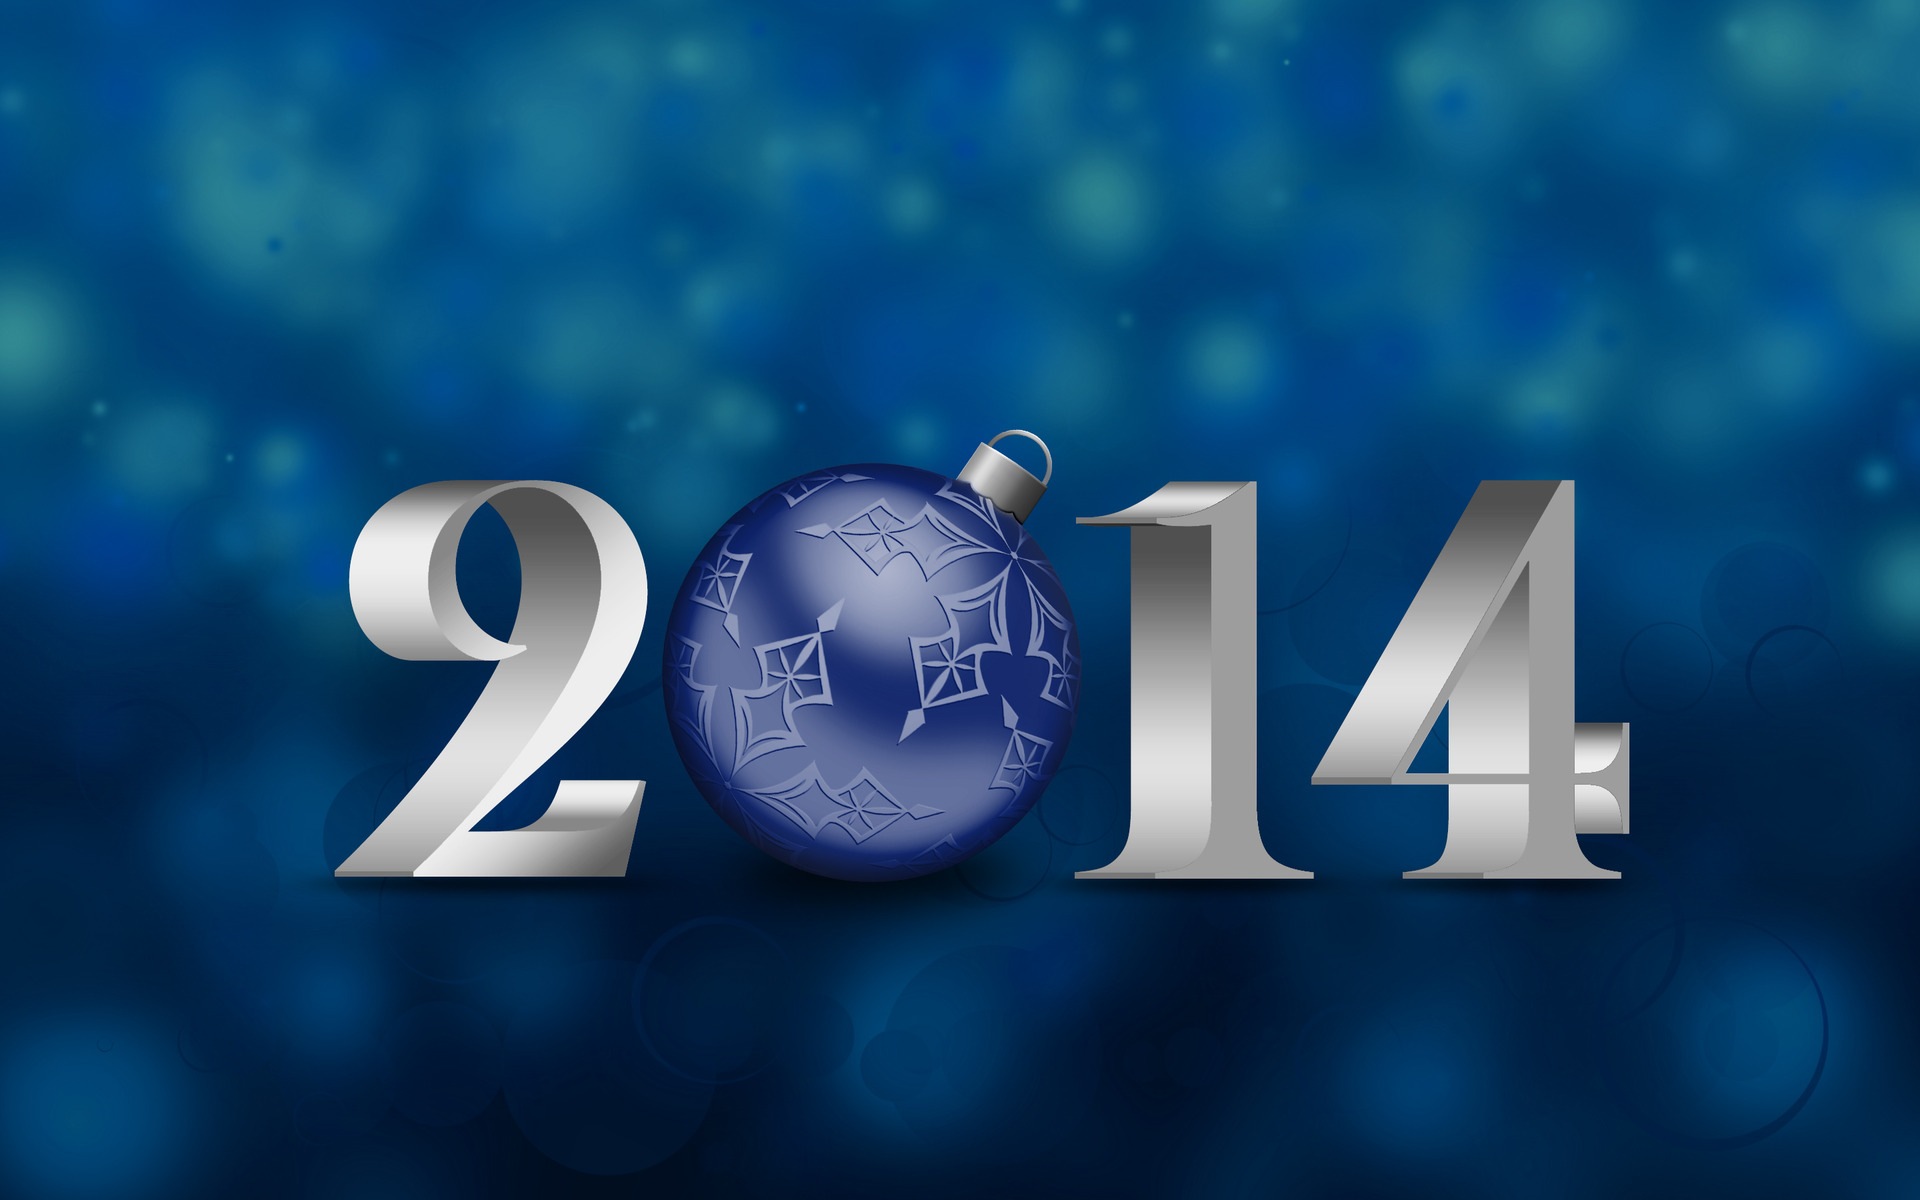 2014 New Year Theme HD Wallpapers (1) #5 - 1920x1200